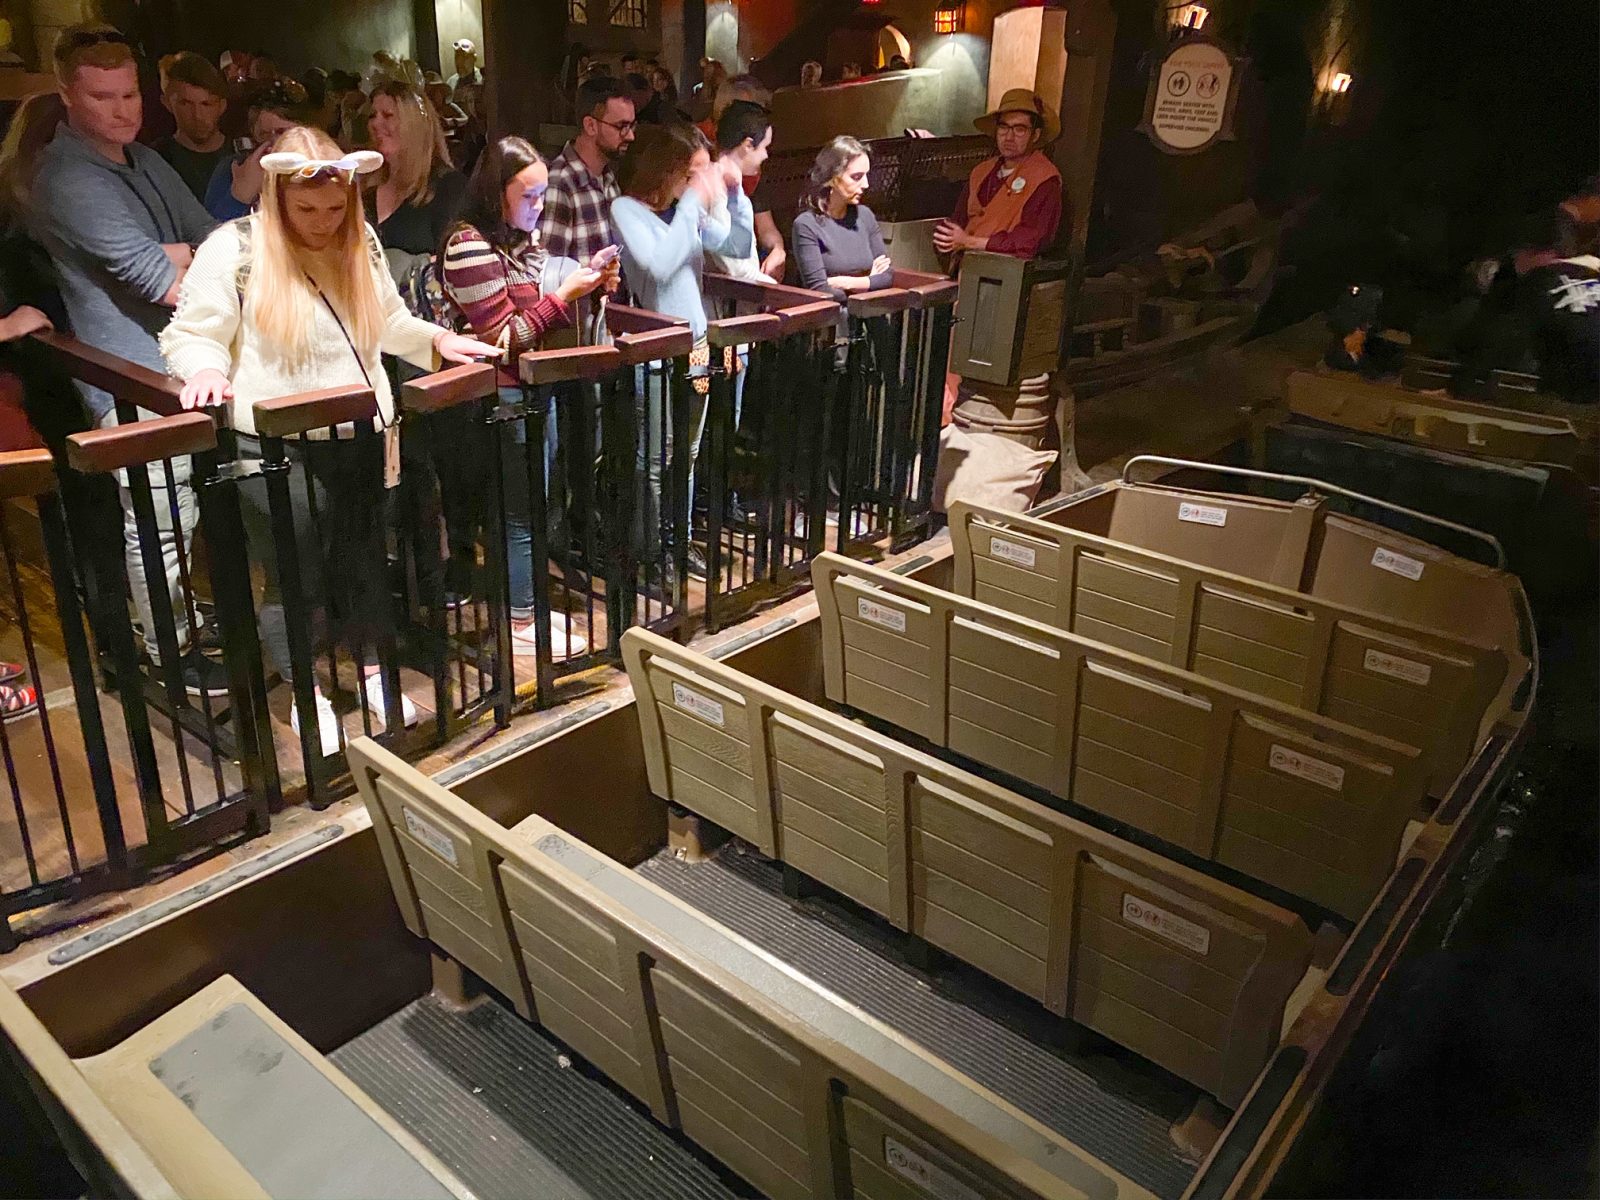 guests waiting to enter the boat on pirates of the Caribbean